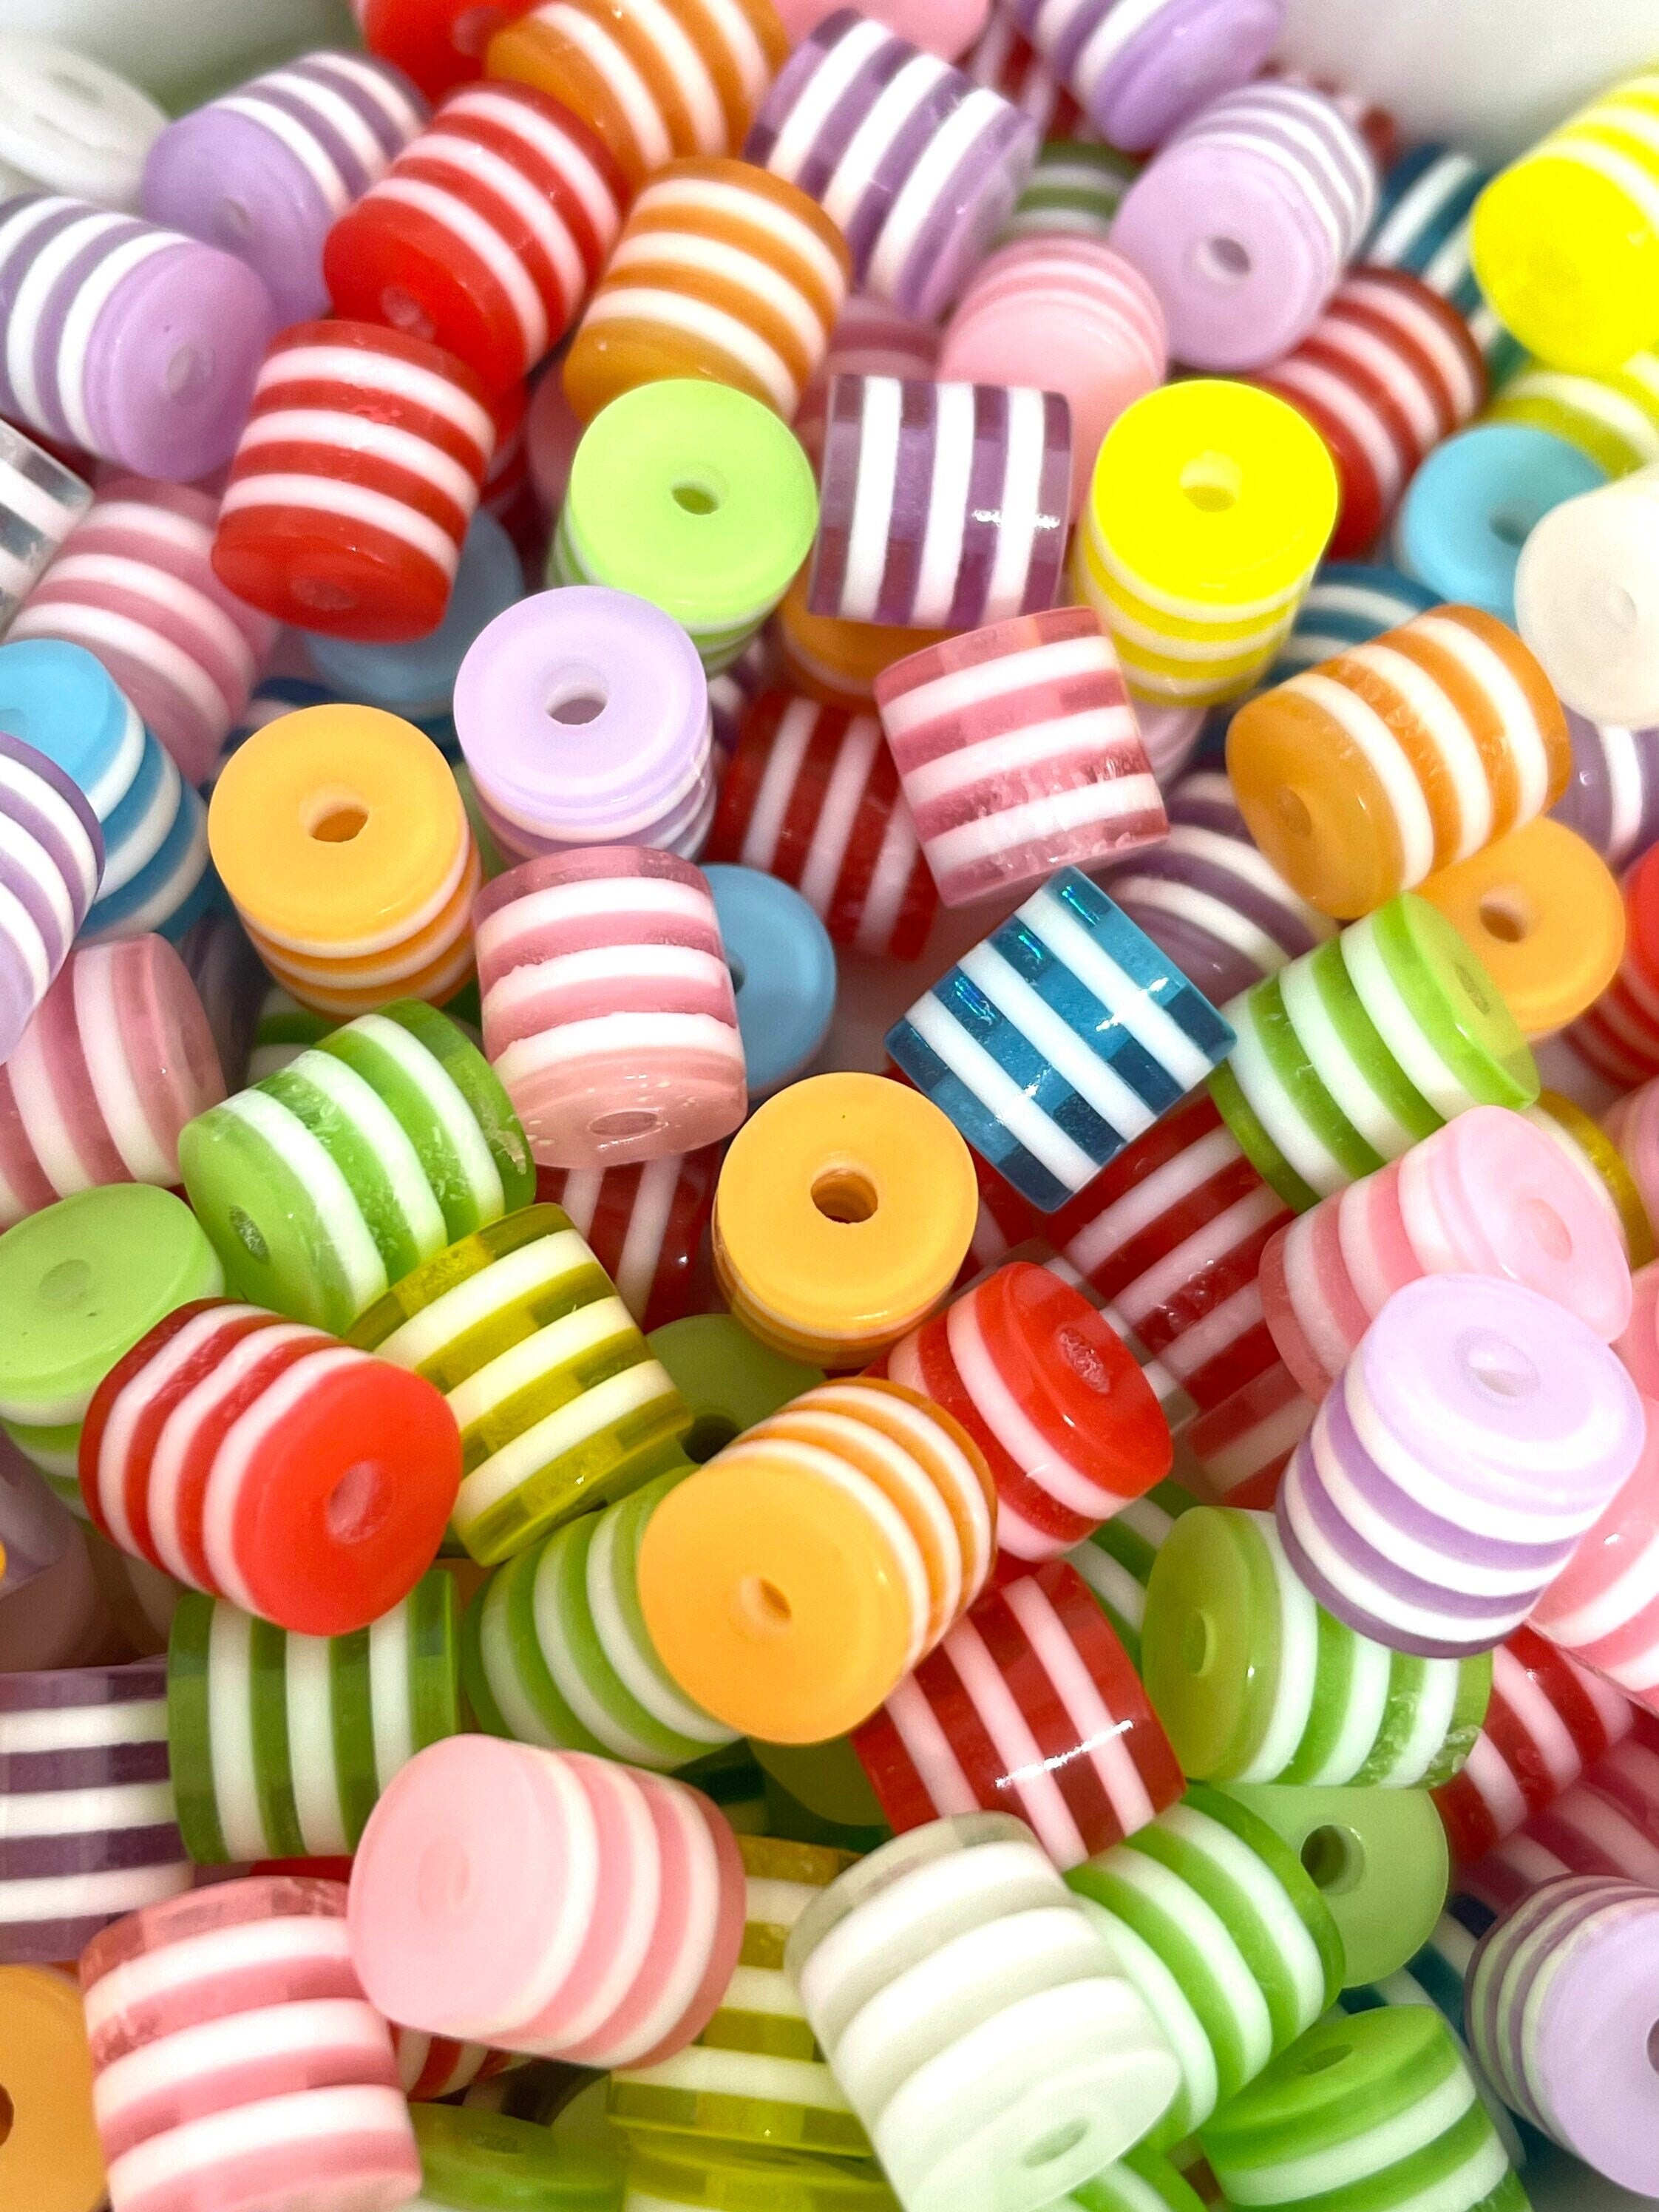 Rainbow Cylinder Beads, Striped Beads, Translucent Beads for Necklace, Pastel Rainbow Beads, Unique Bead Mix, Bead Variety